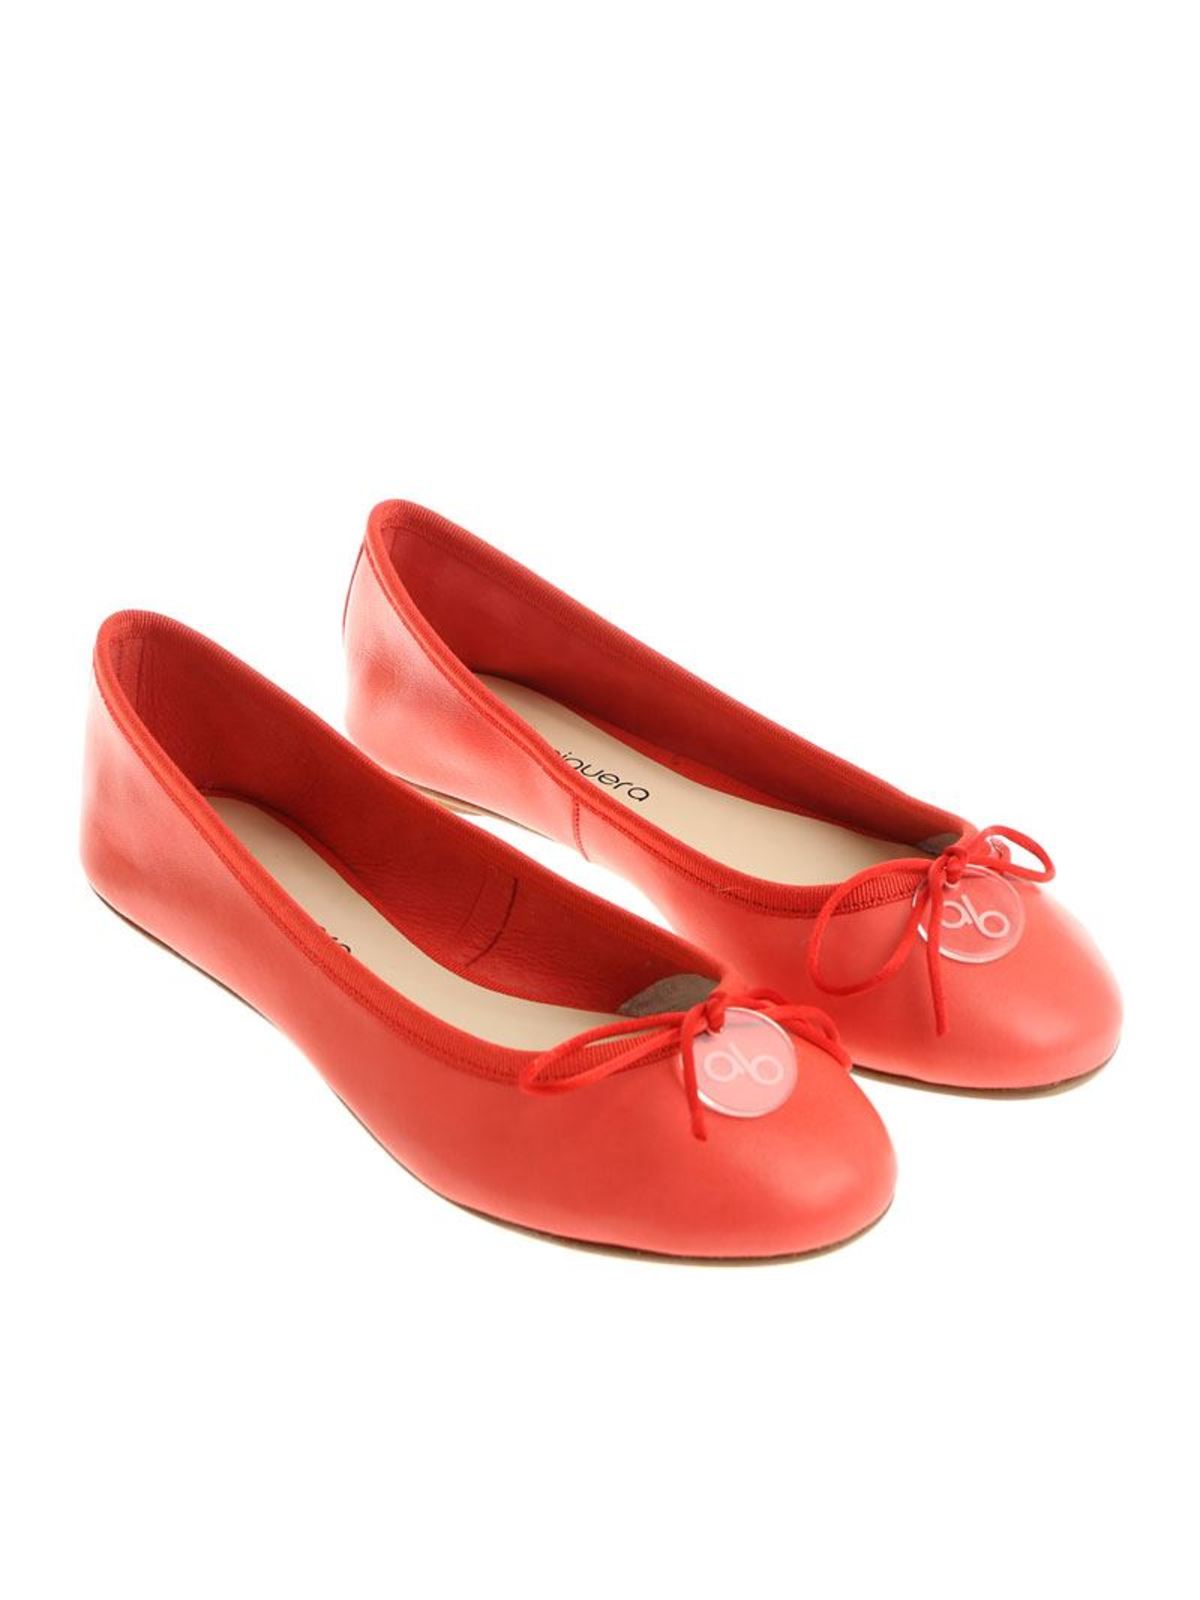 coral flat shoes